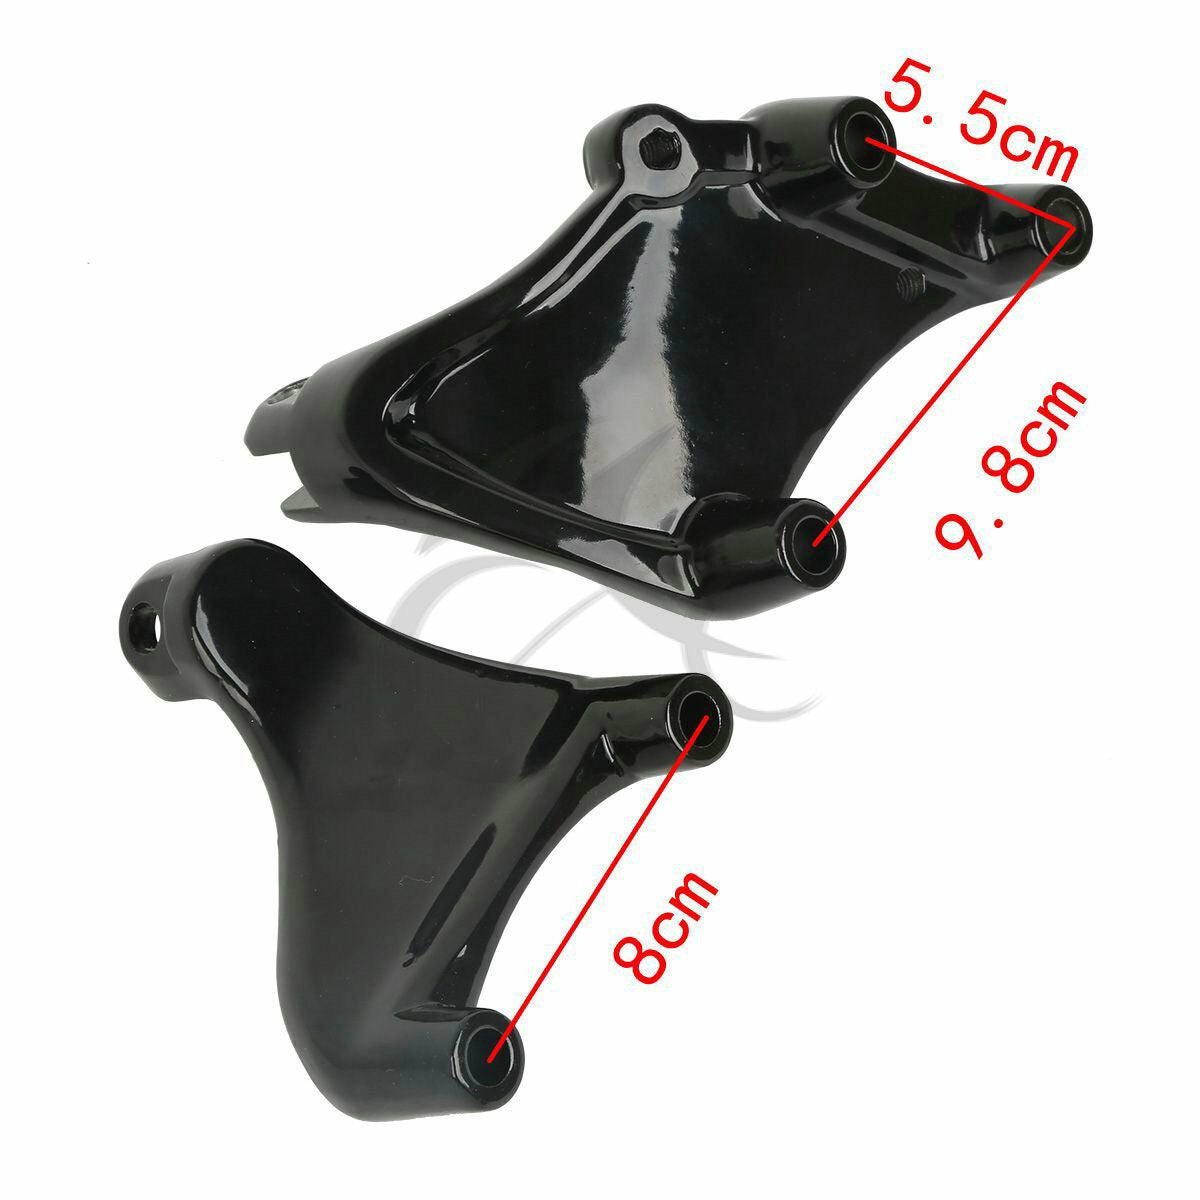 Rear Passenger Foot Pegs Mount Kit For Harley Sportster XL 2014-2022 2019 2015 - Moto Life Products